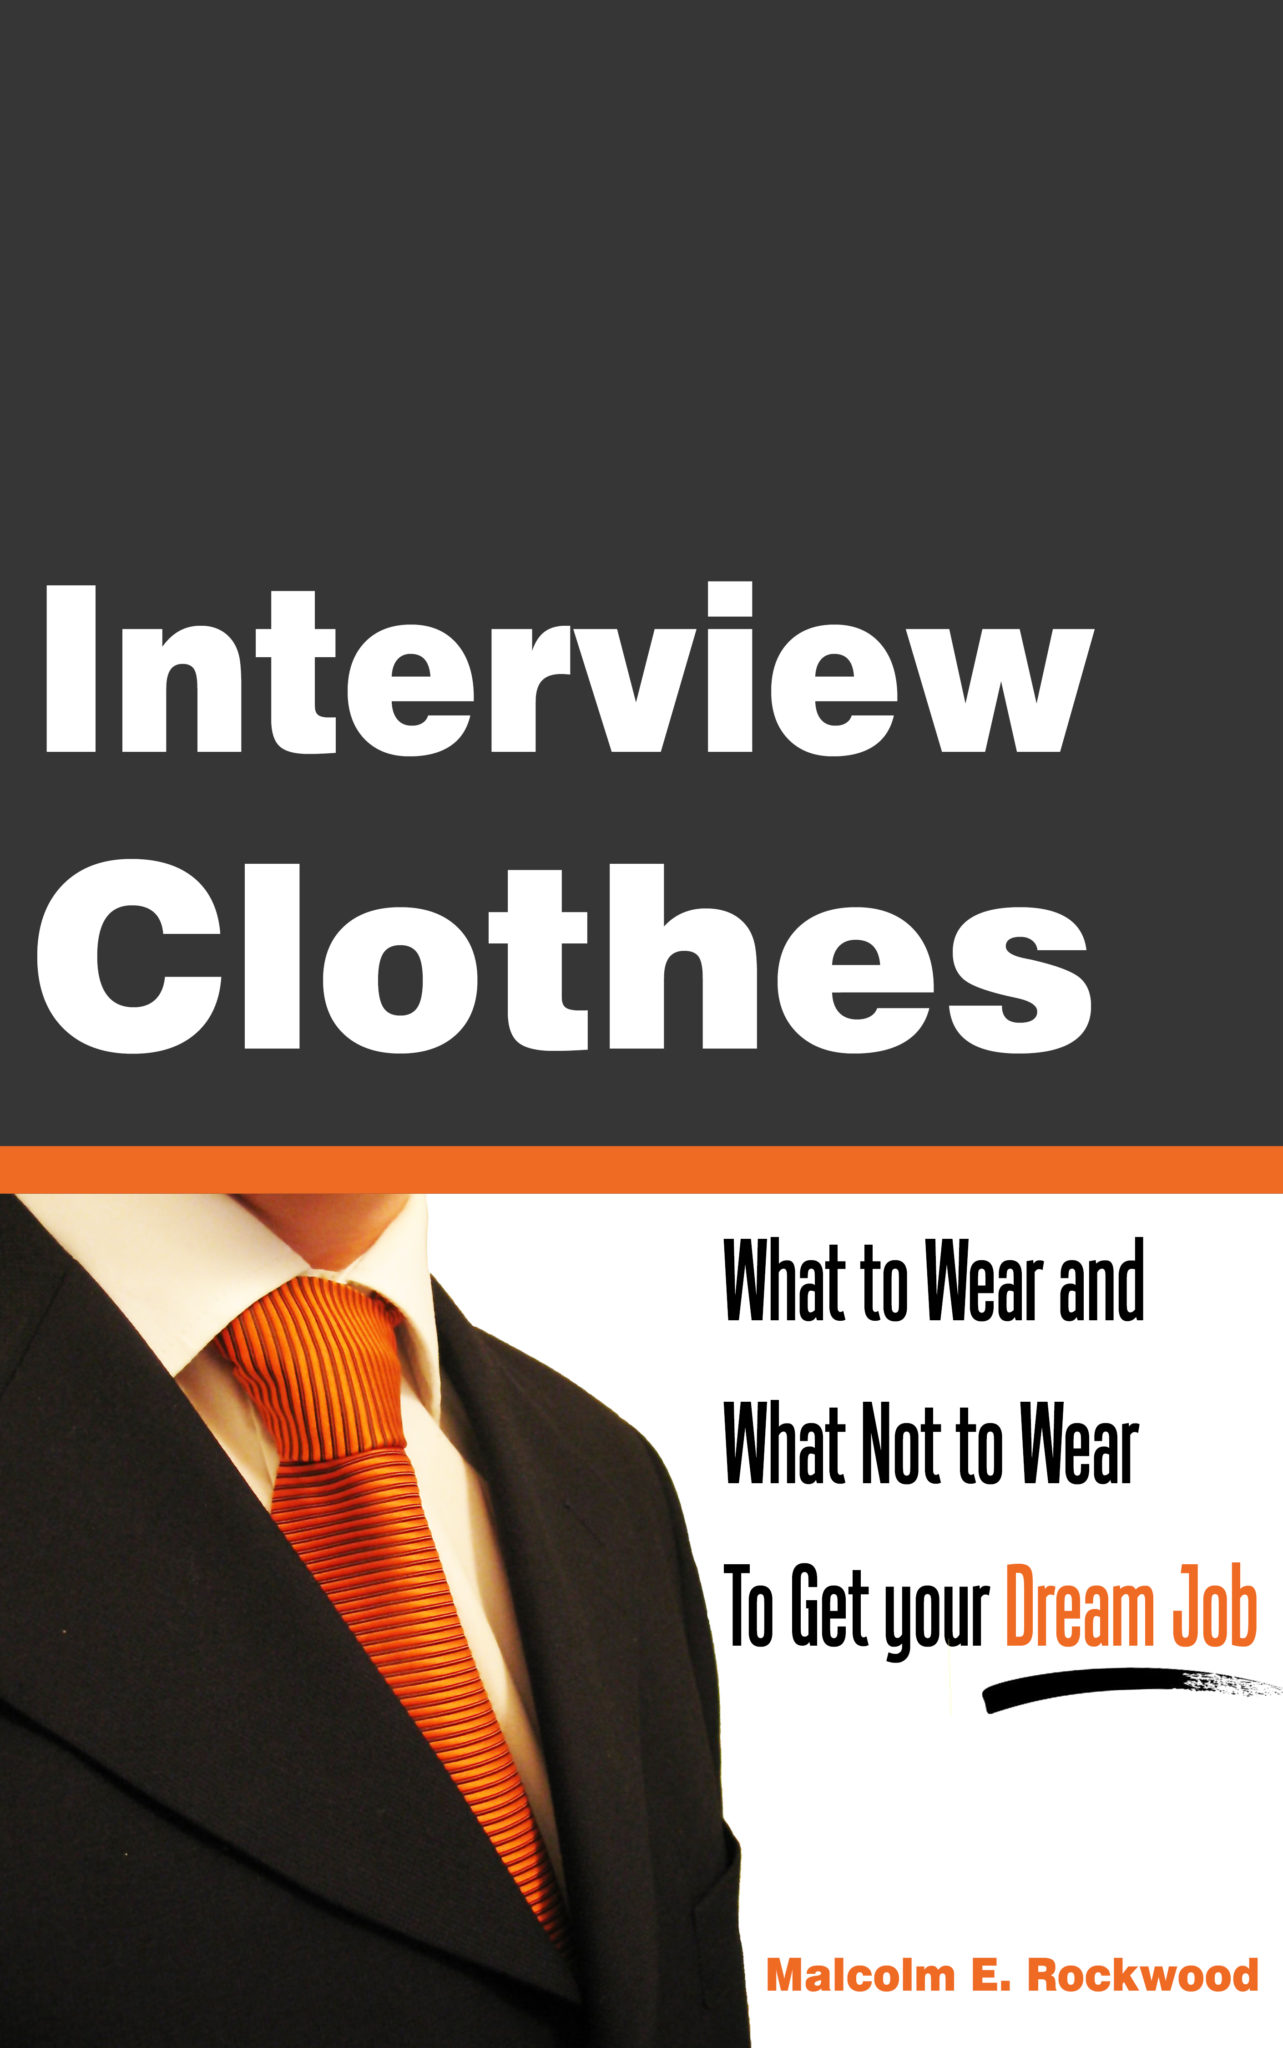 Interview Clothes – What to Wear and What Not to Wear to Get your Dream Job by Malcolm Rockwood